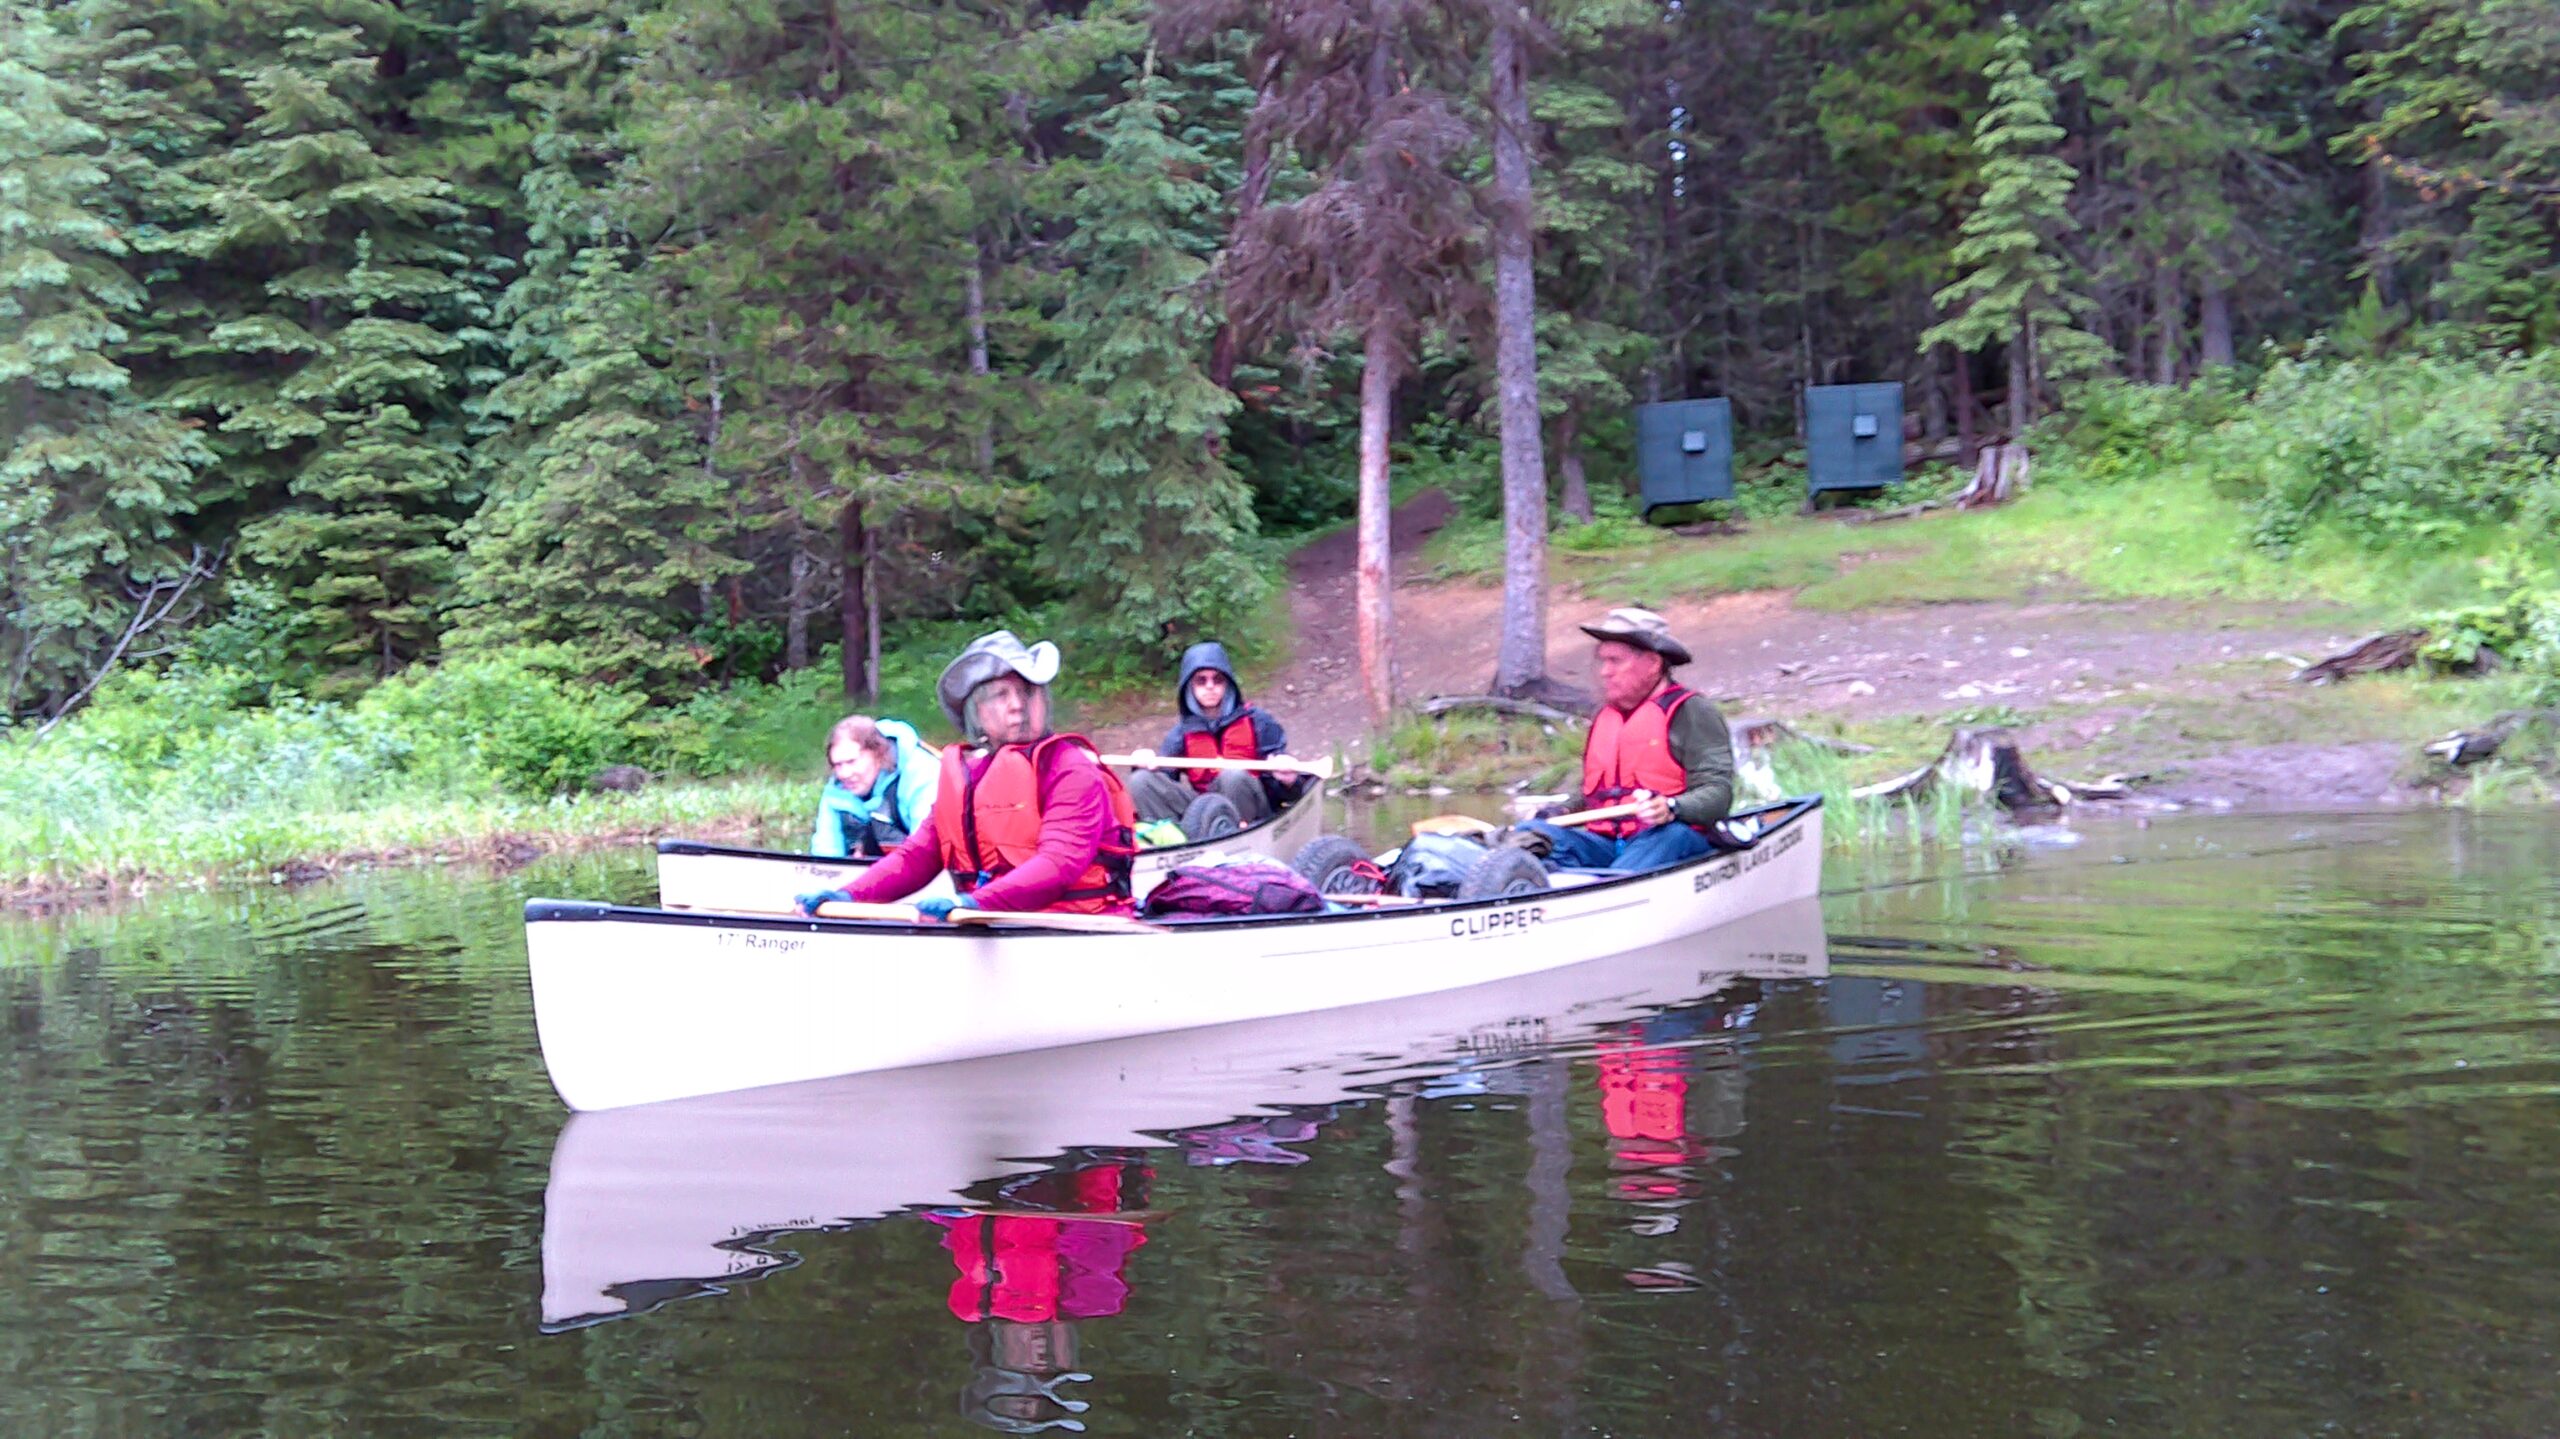 Scouts riding on a boat.